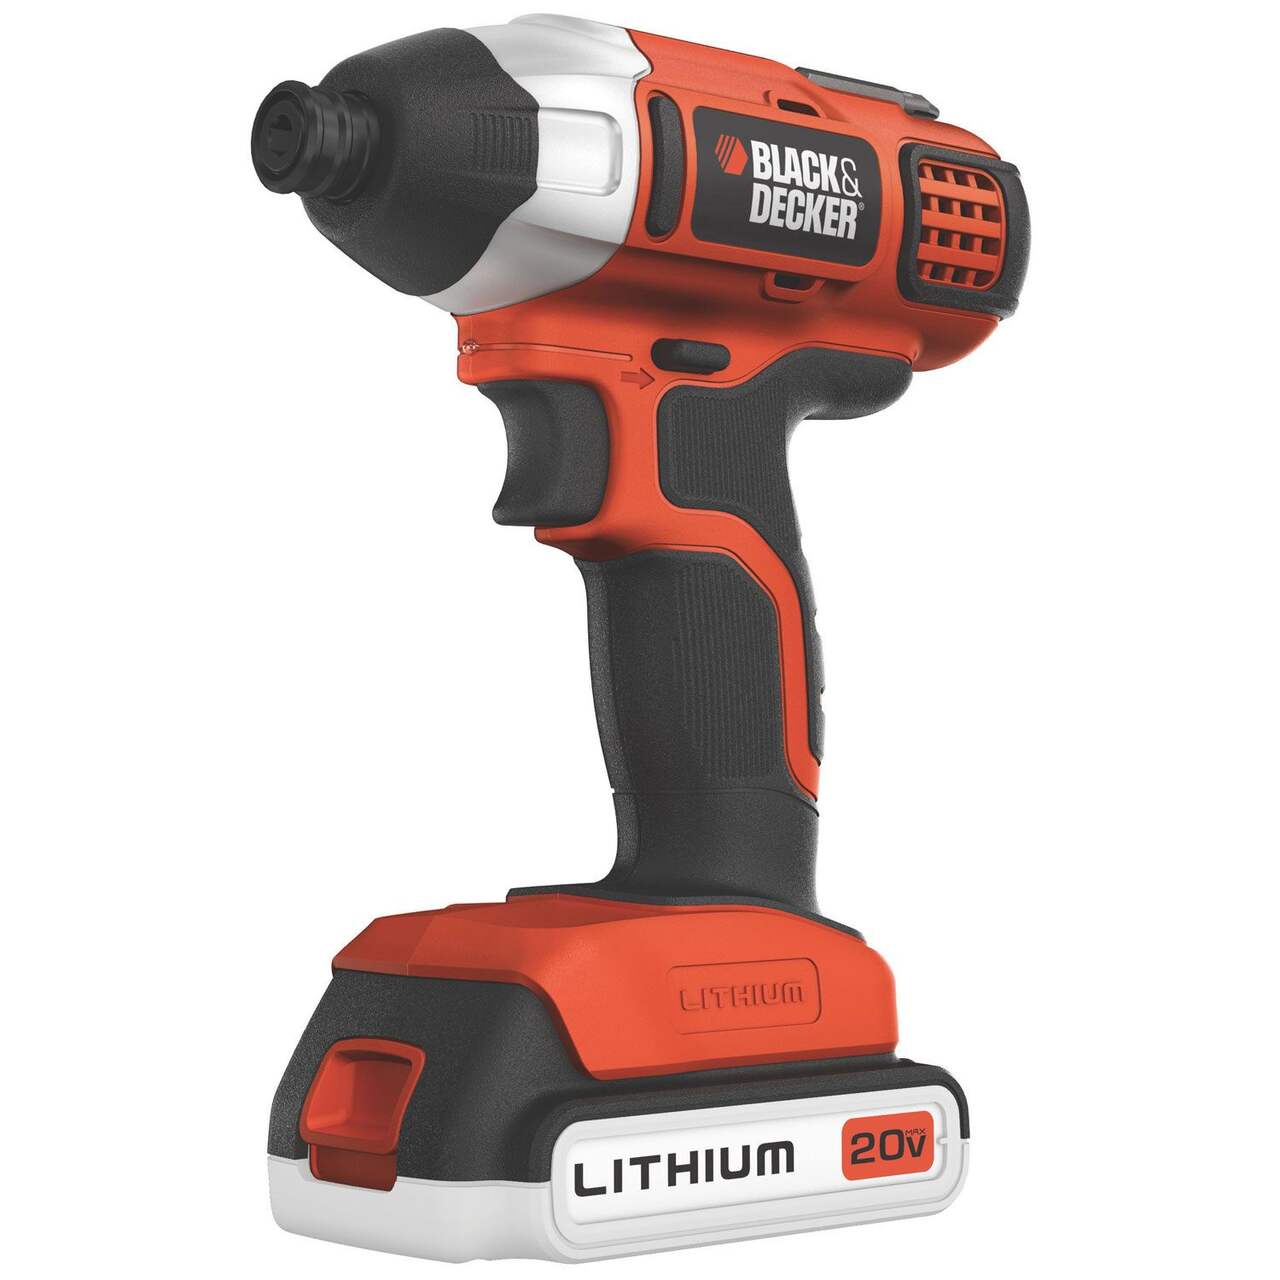 https://media-www.canadiantire.ca/product/fixing/tools/portable-power-tools/0543220/black-decker-20v-impact-driver-2c411a83-5a22-4320-b52e-7df66dc19c1d-jpgrendition.jpg?imdensity=1&imwidth=640&impolicy=mZoom